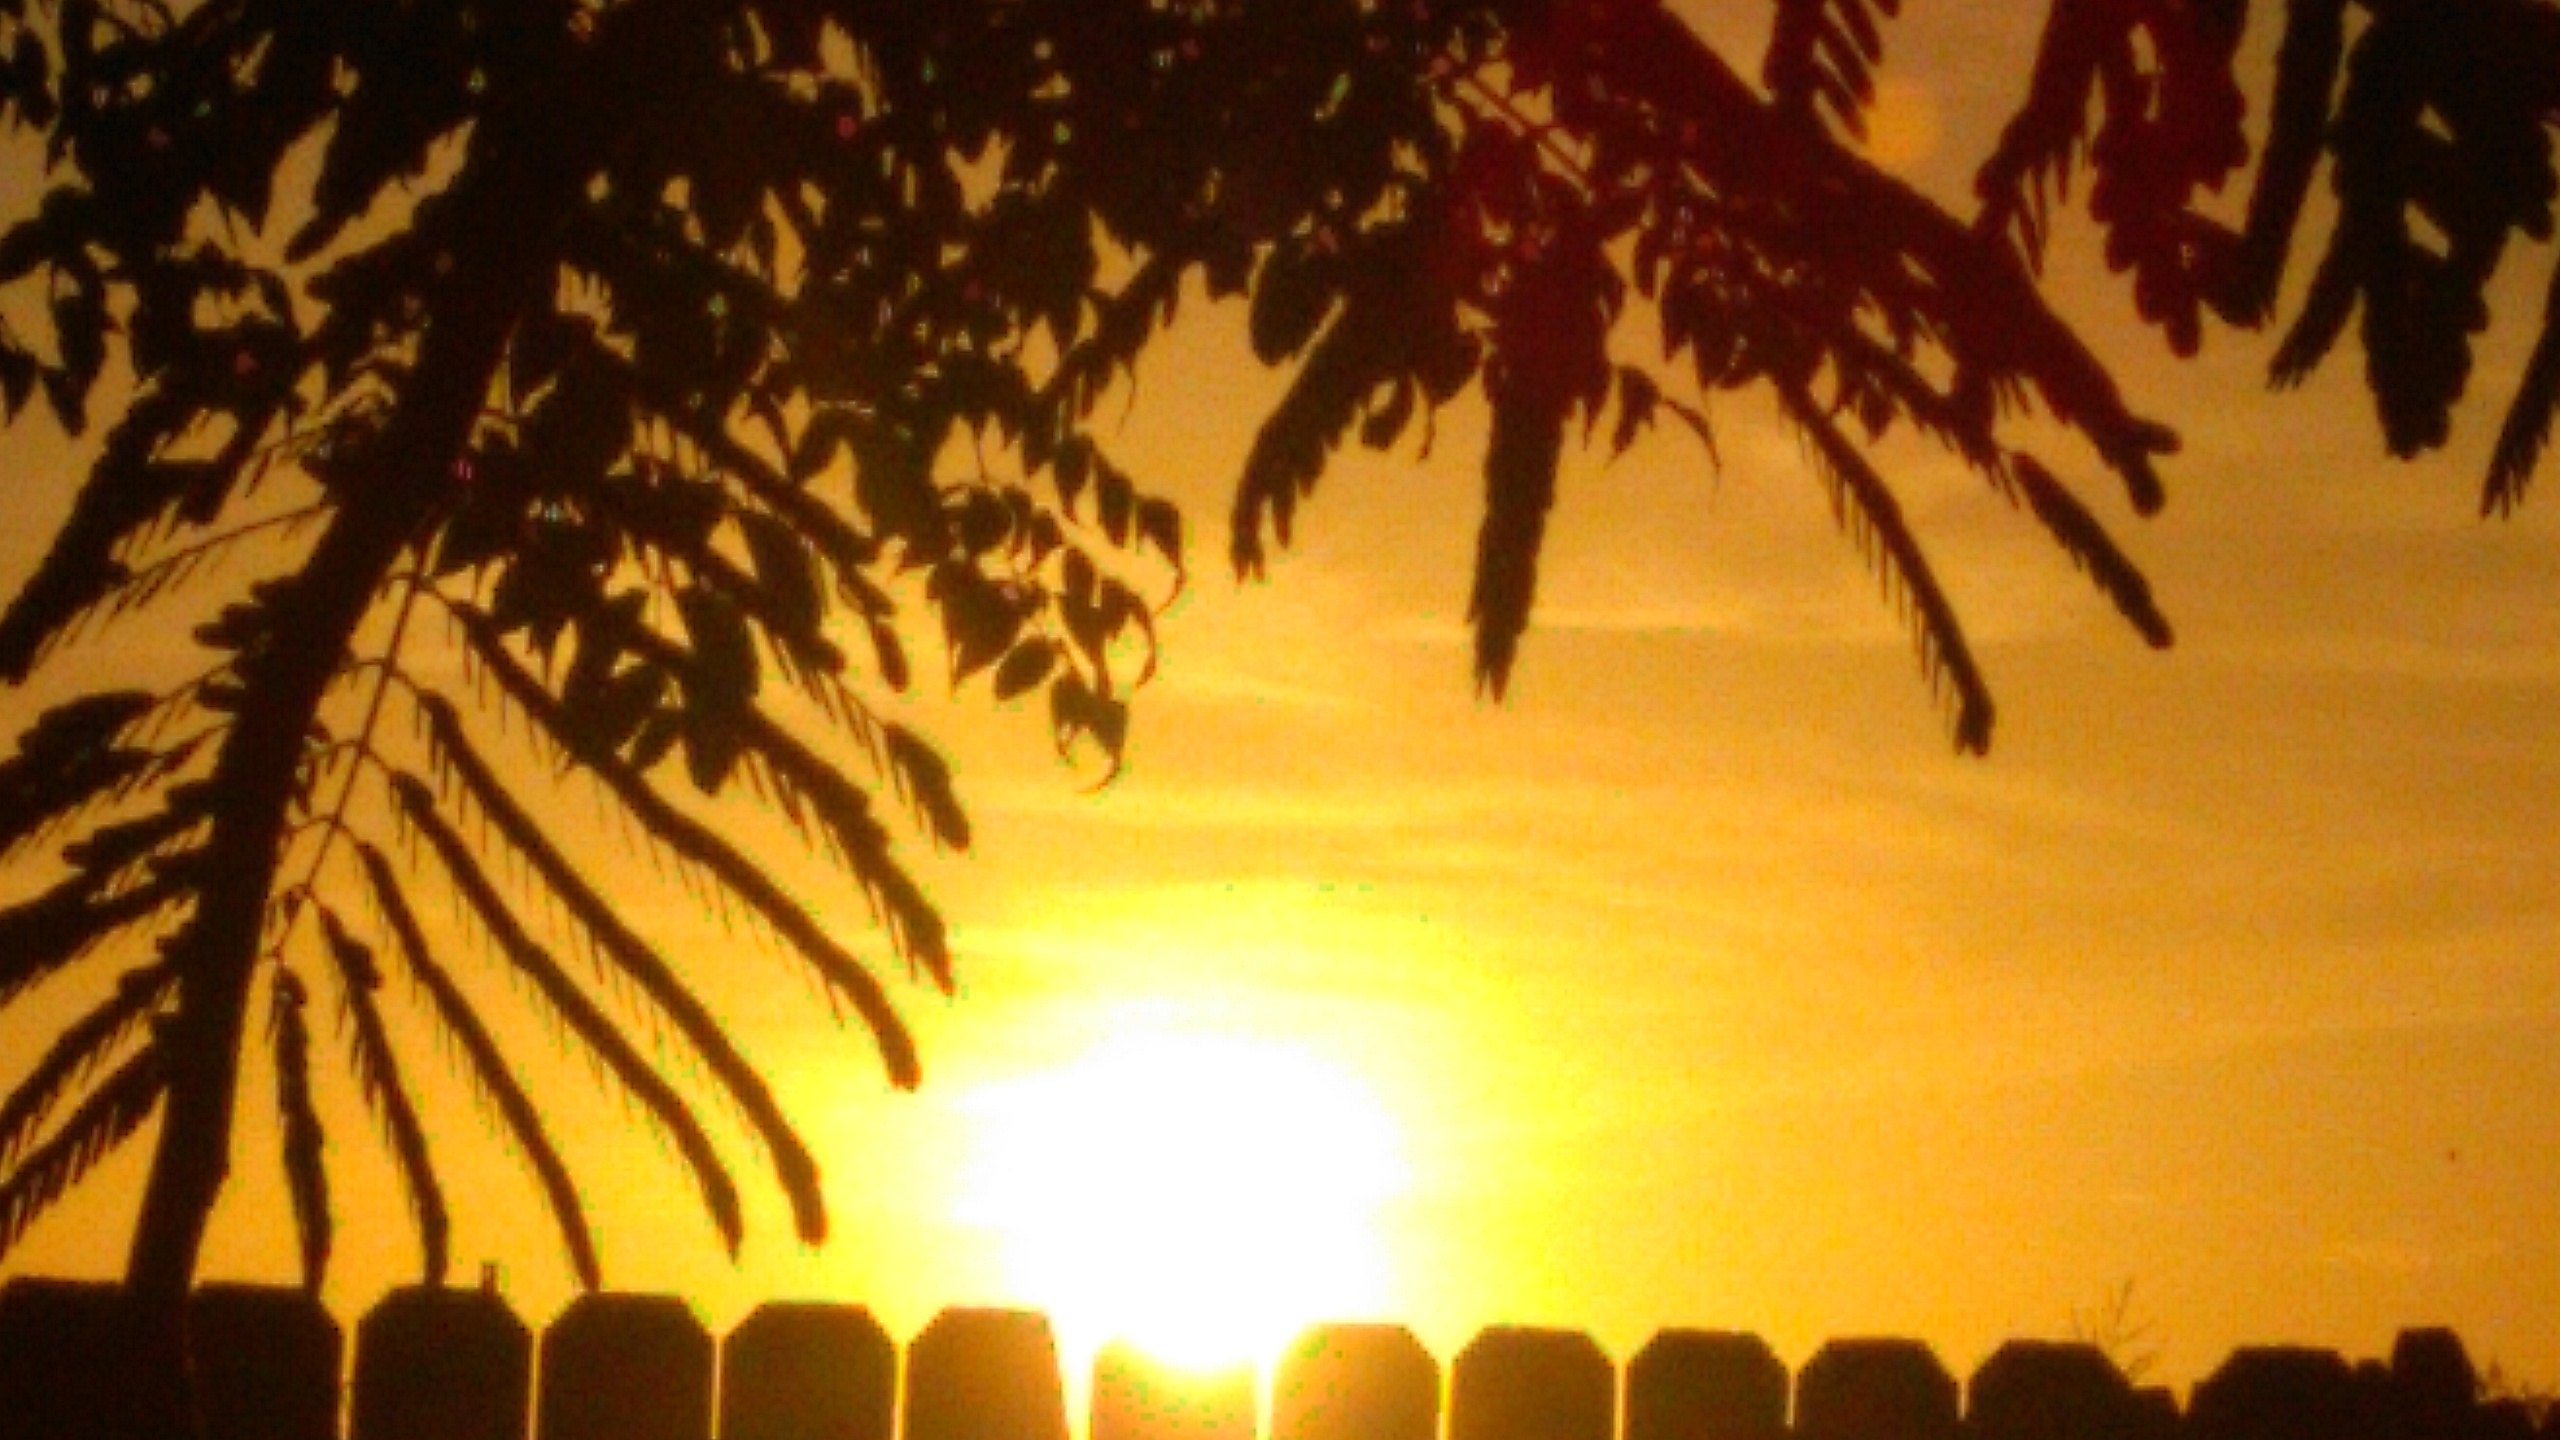 sunset in the back yard, magnified